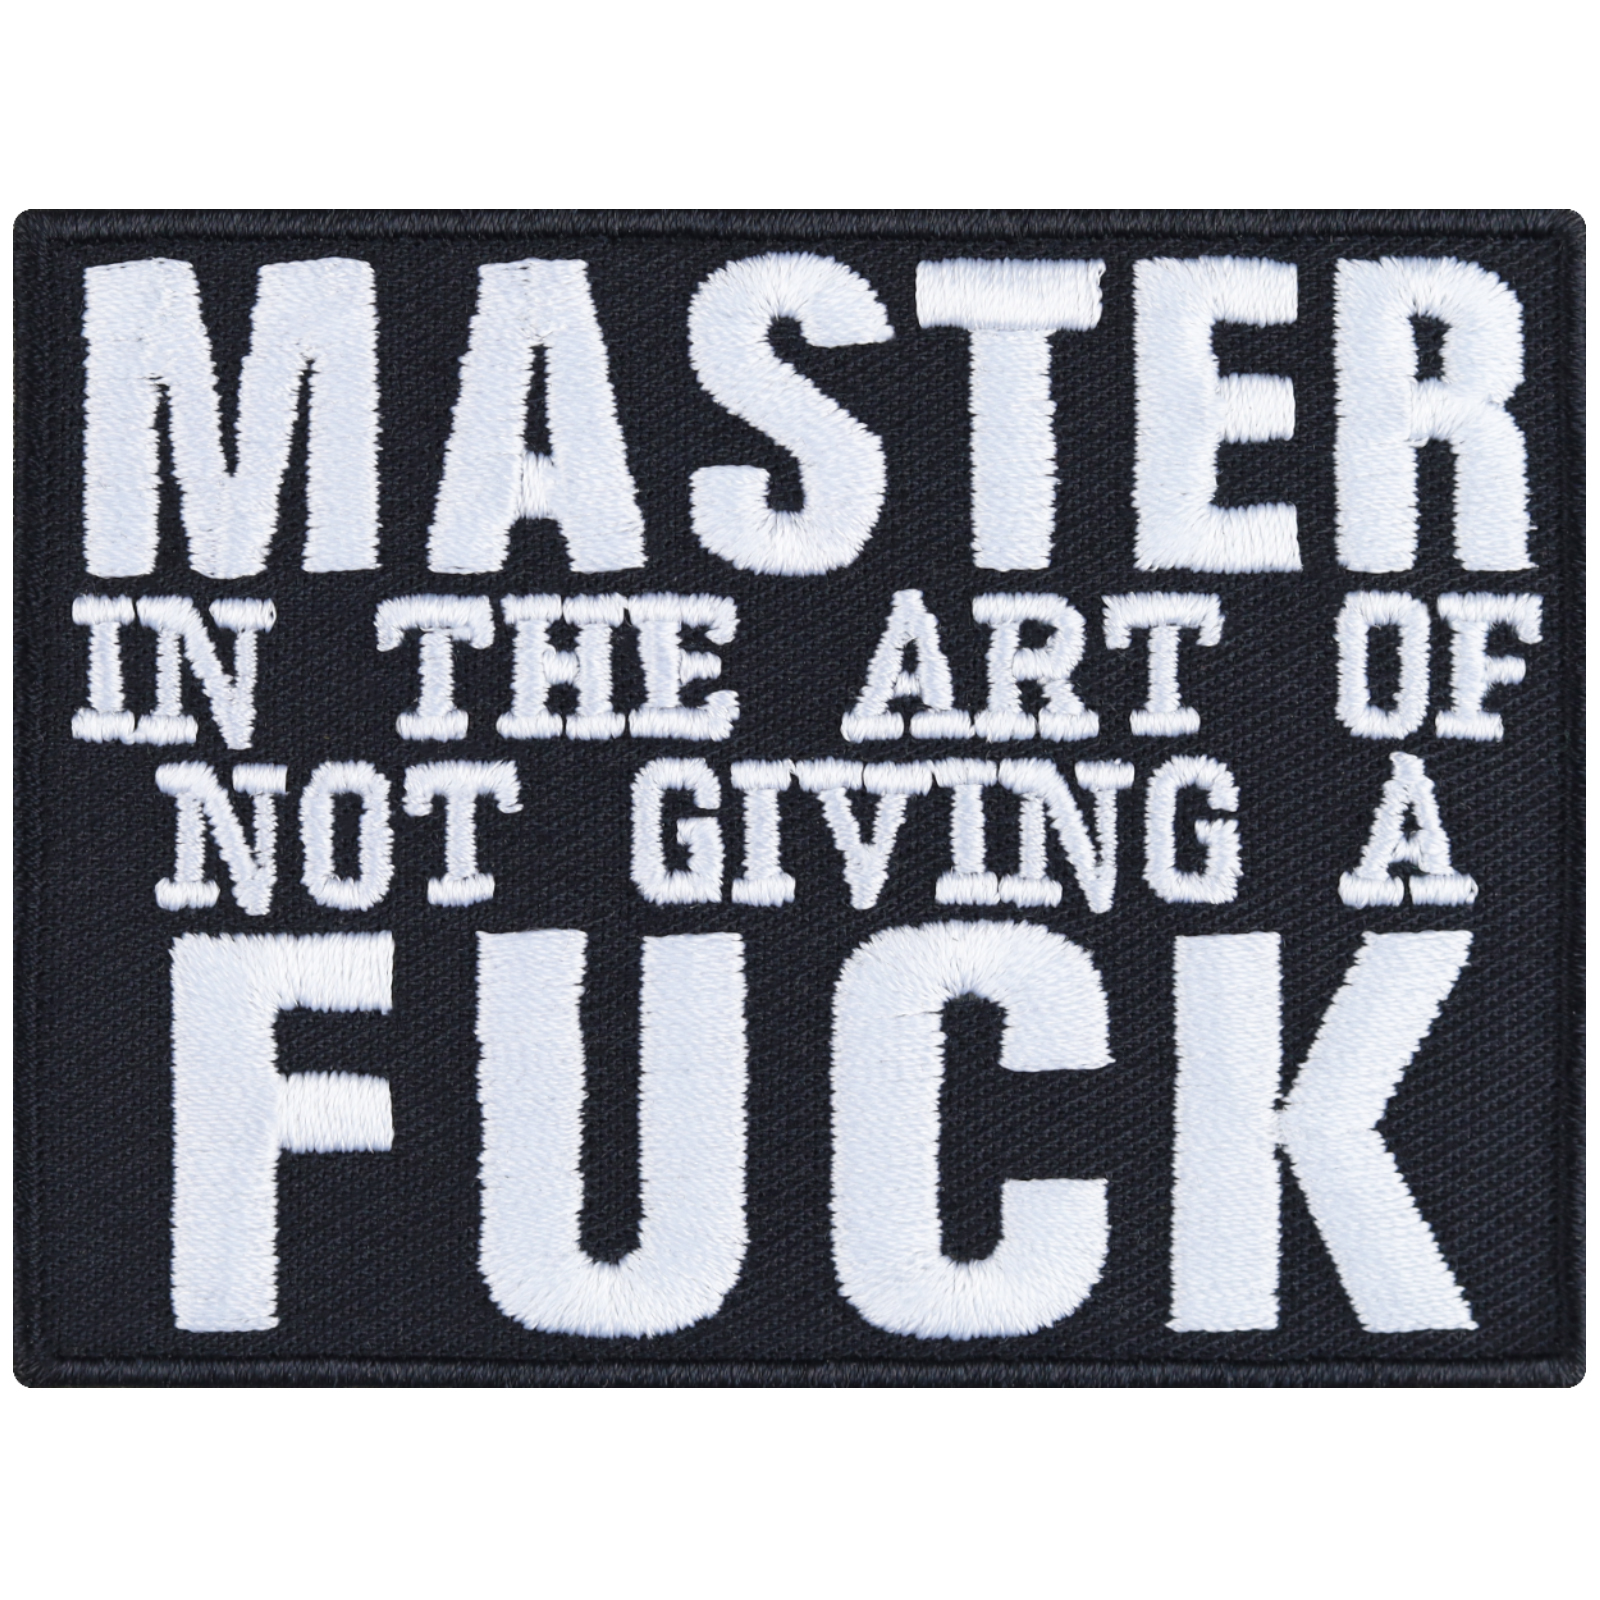 Master of not giving a fuck - Patch